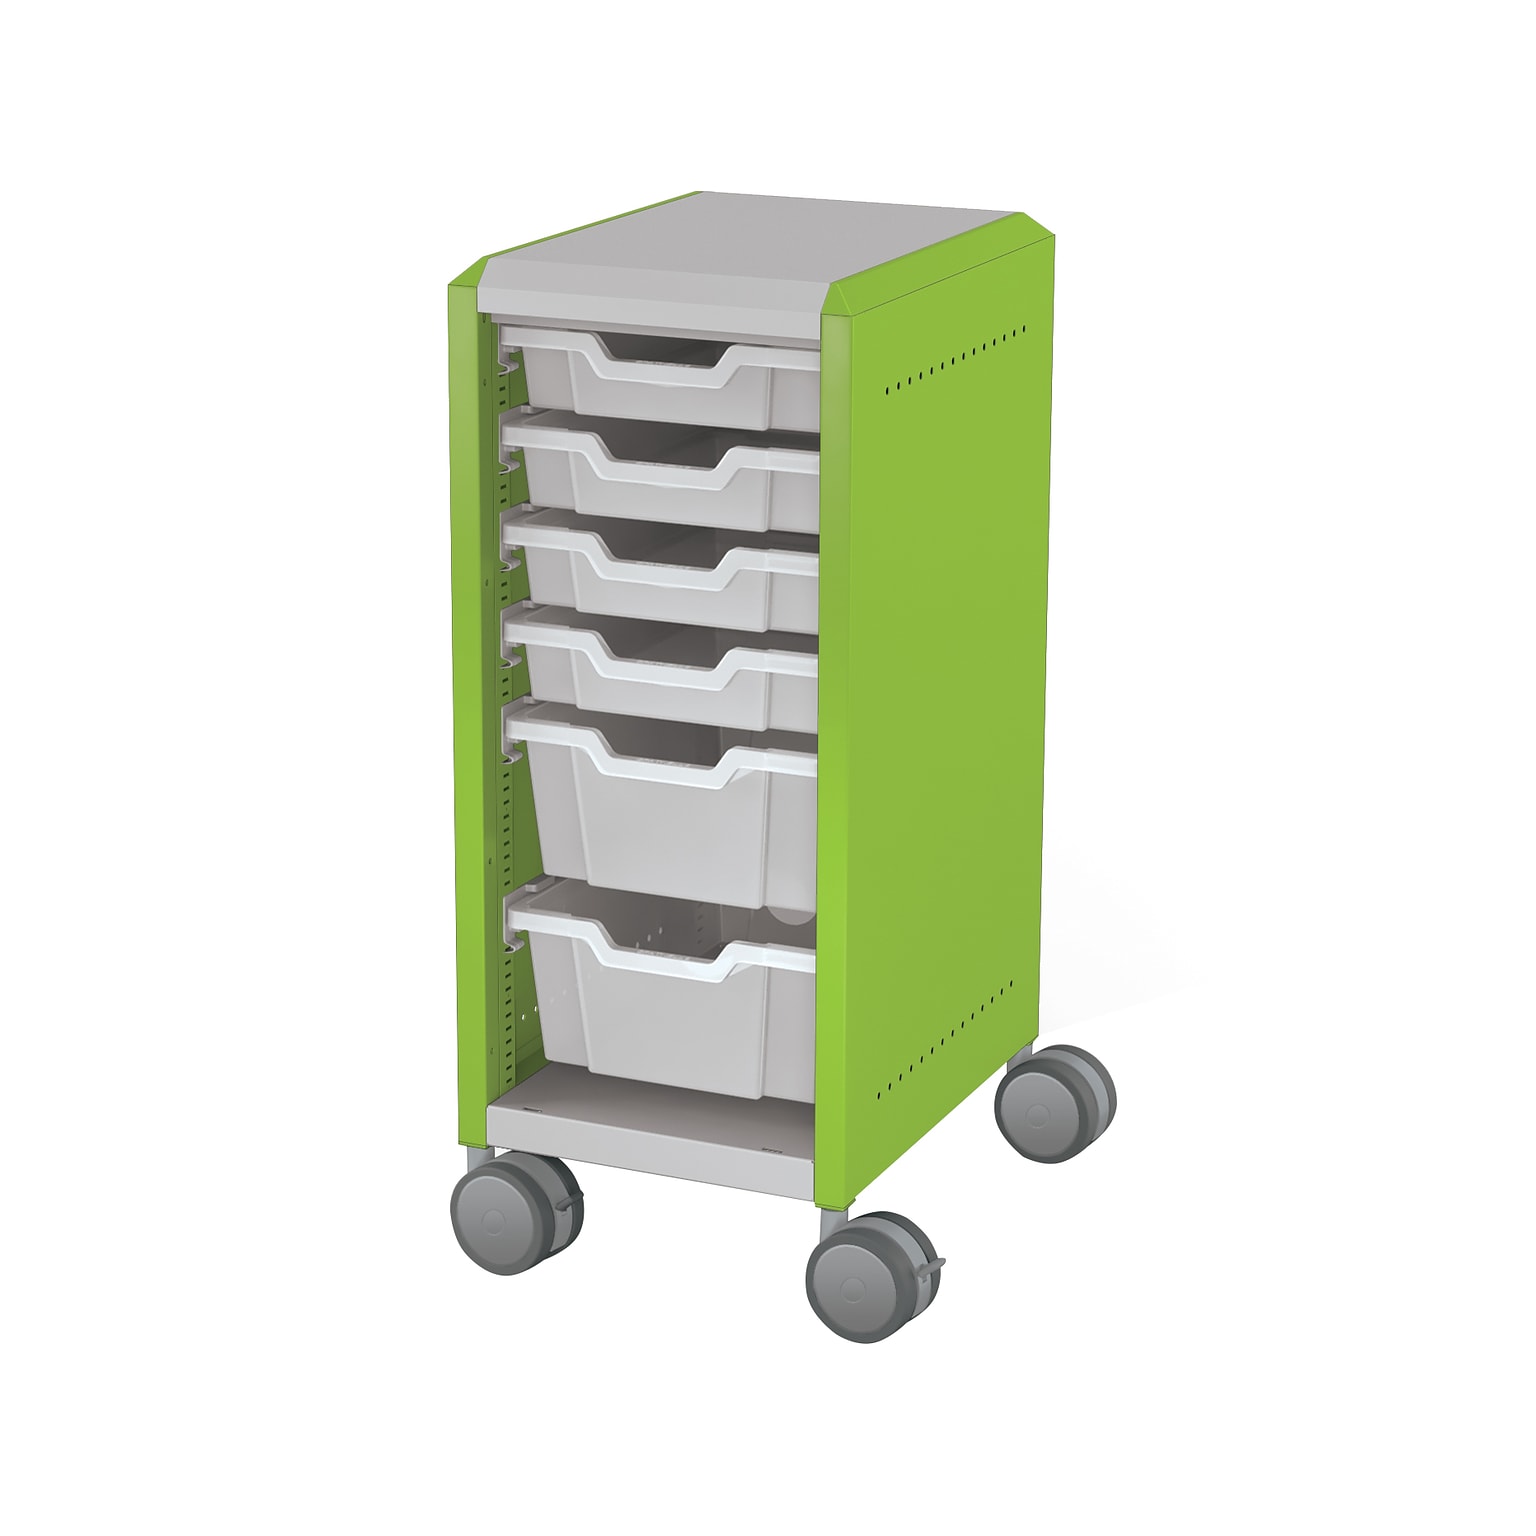 MooreCo Compass Mini H2 Mobile 6-Section Storage Cabinet, 36.13H x 14.88W x 19.13D, Platinum/Green Metal (B1A1F1C1X0)